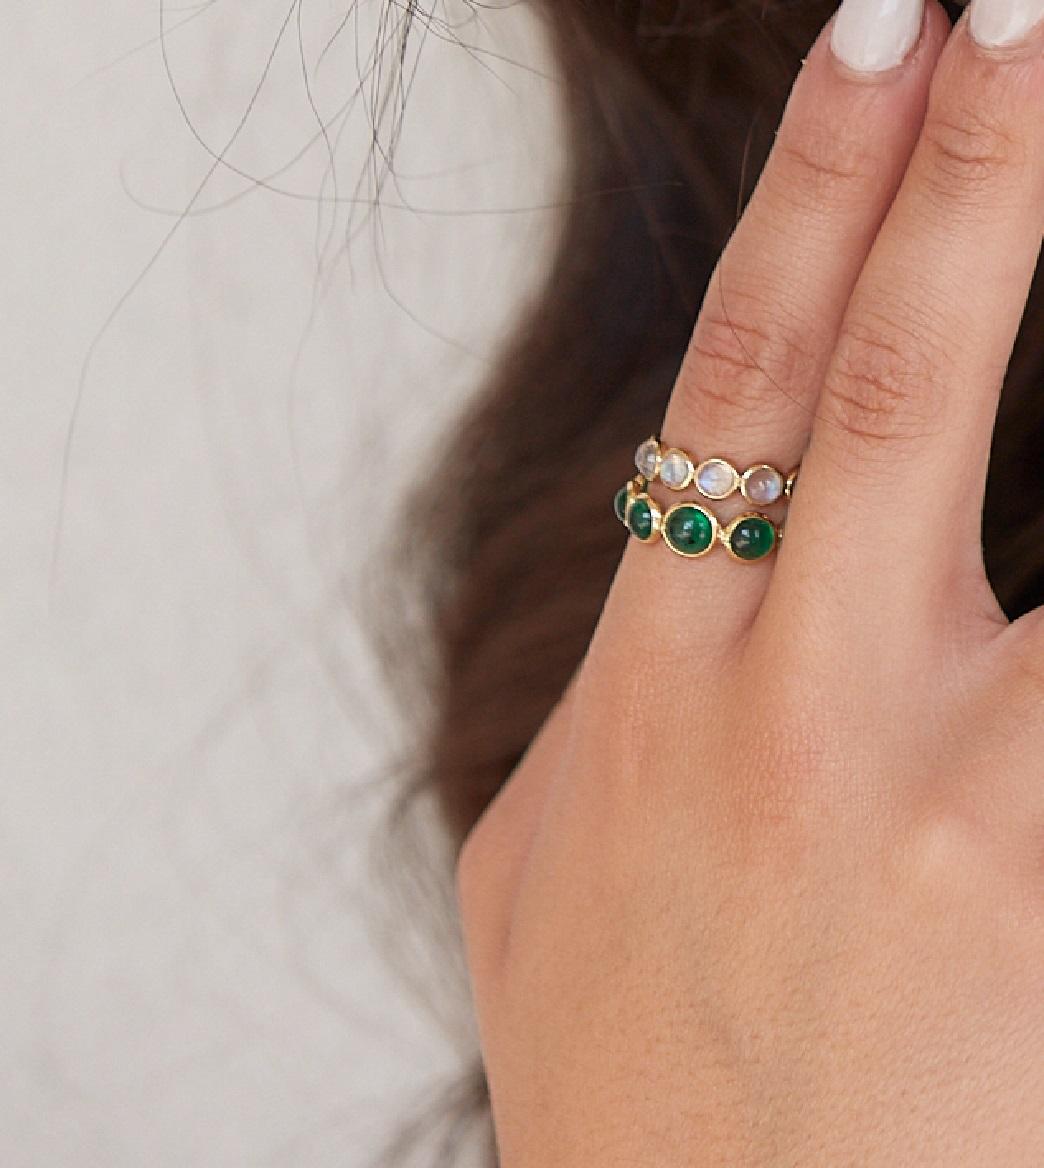 Tresor Beautiful Ring feature 3.90 total carats of Emerald. The Ring are an ode to the luxurious yet classic beauty with sparkly gemstones and feminine hues. Their contemporary and modern design make them perfect and versatile to be worn at any